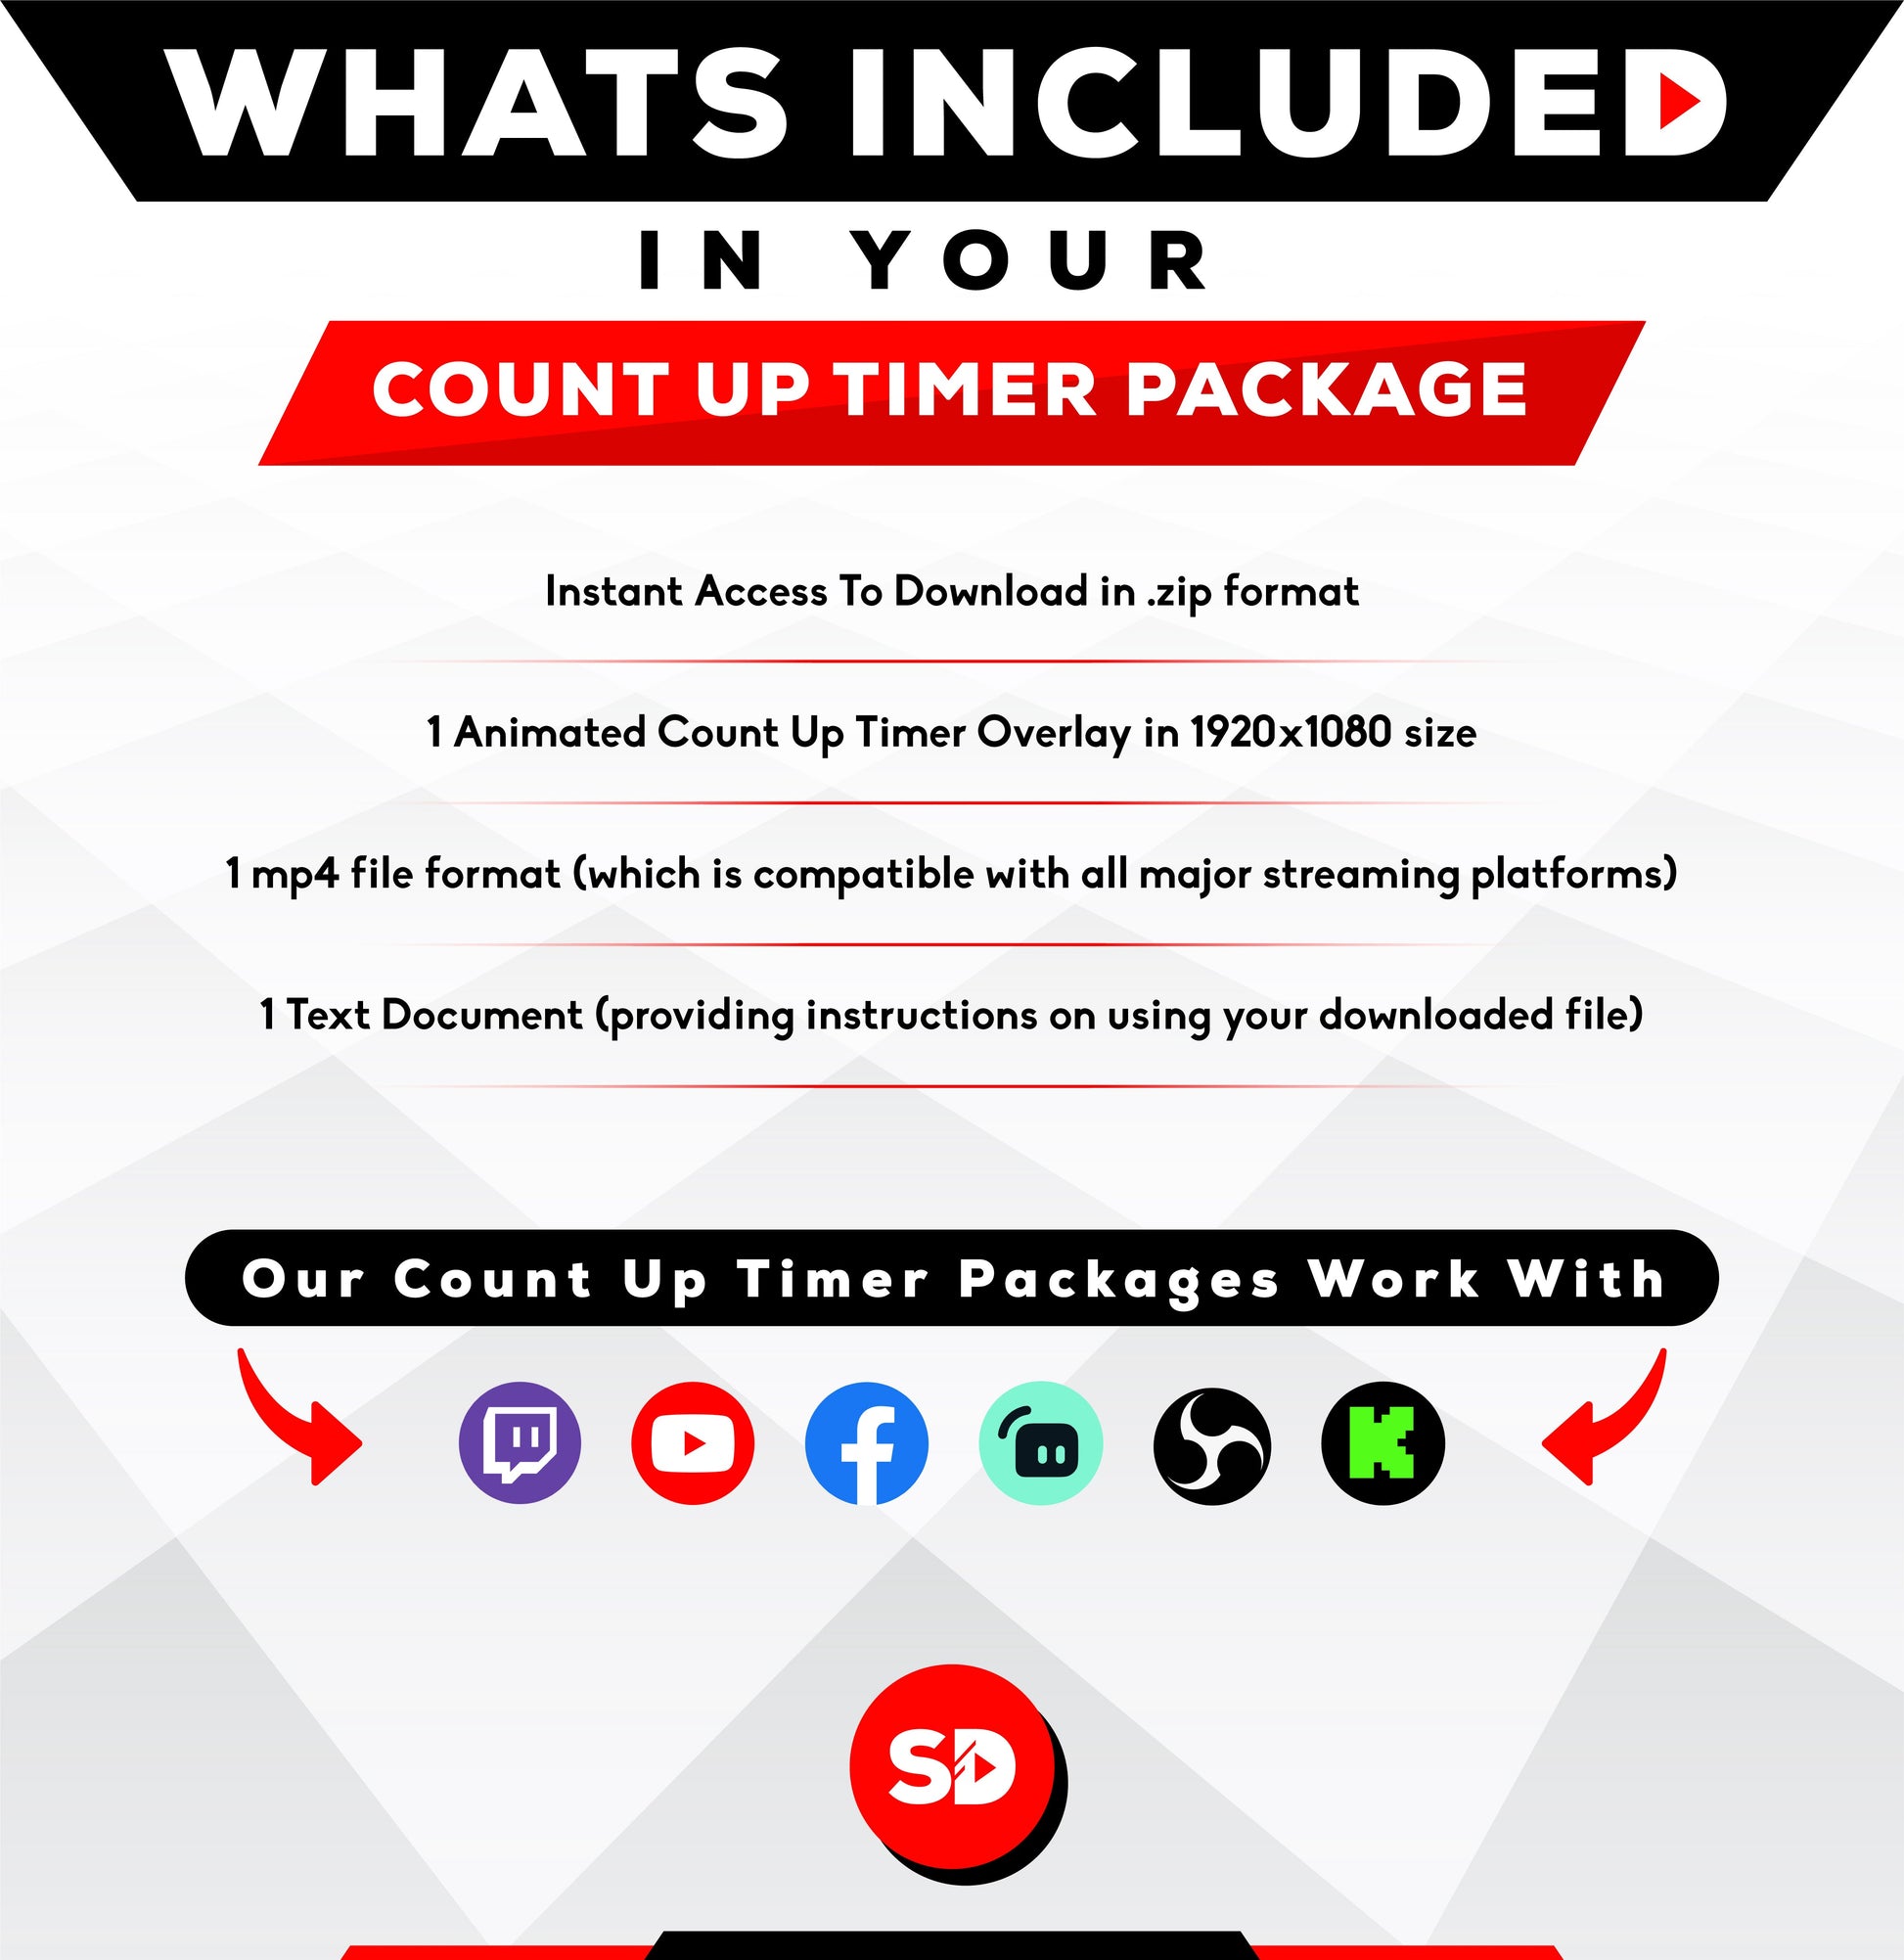 whats included in your package - count up timer - 5 minute count up timer thumbnail - valentine lofi - stream designz - stream designz